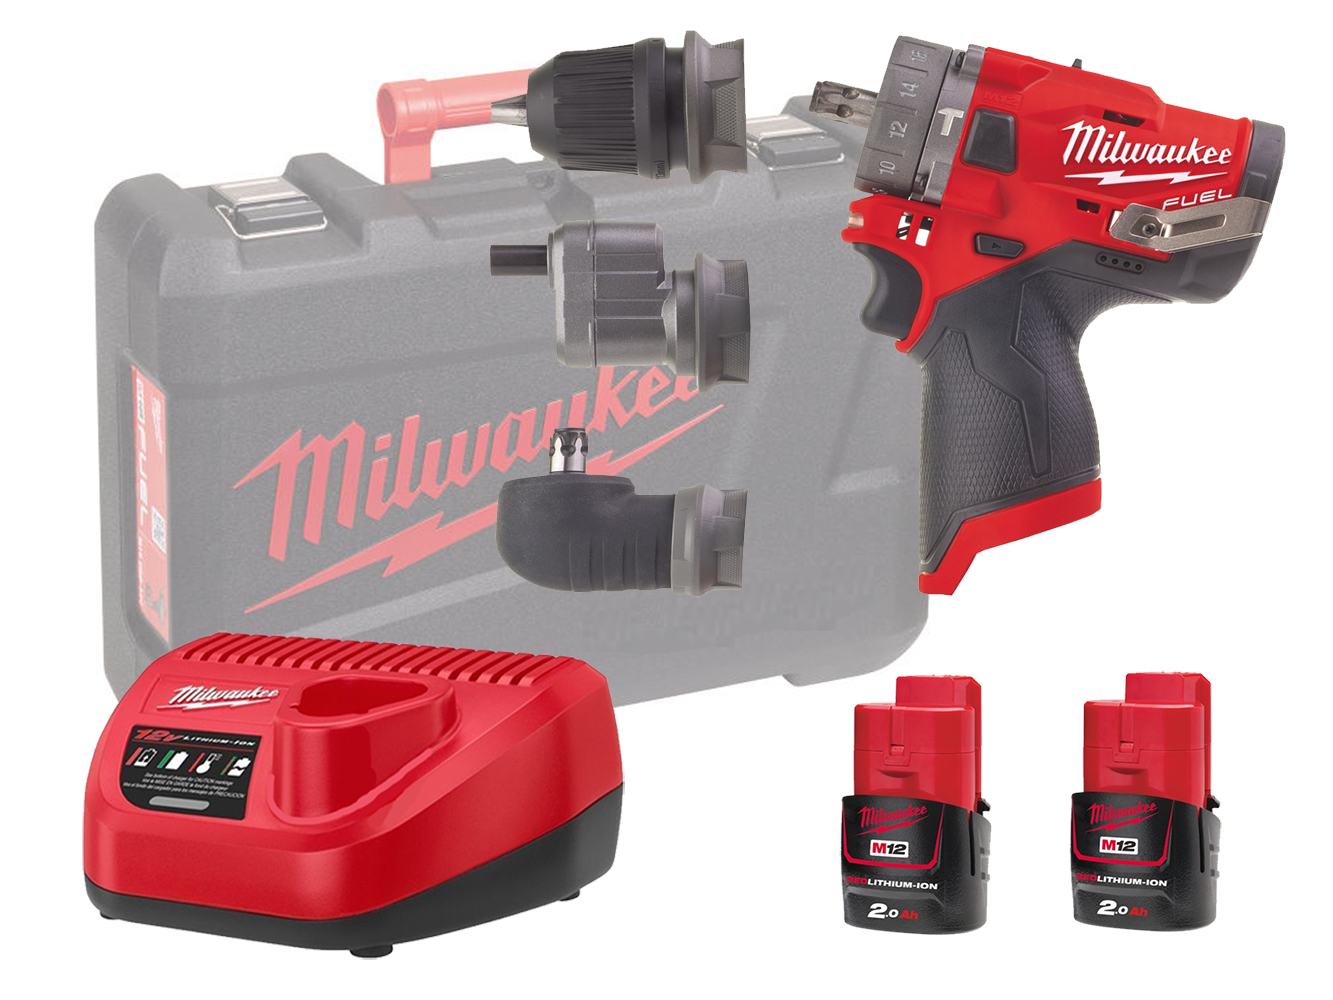 Milwaukee M12FPDX 12V Fuel Sub Compact Percussion Drill (Combi Drill) With Removable Chuck - 2.0Ah Pack